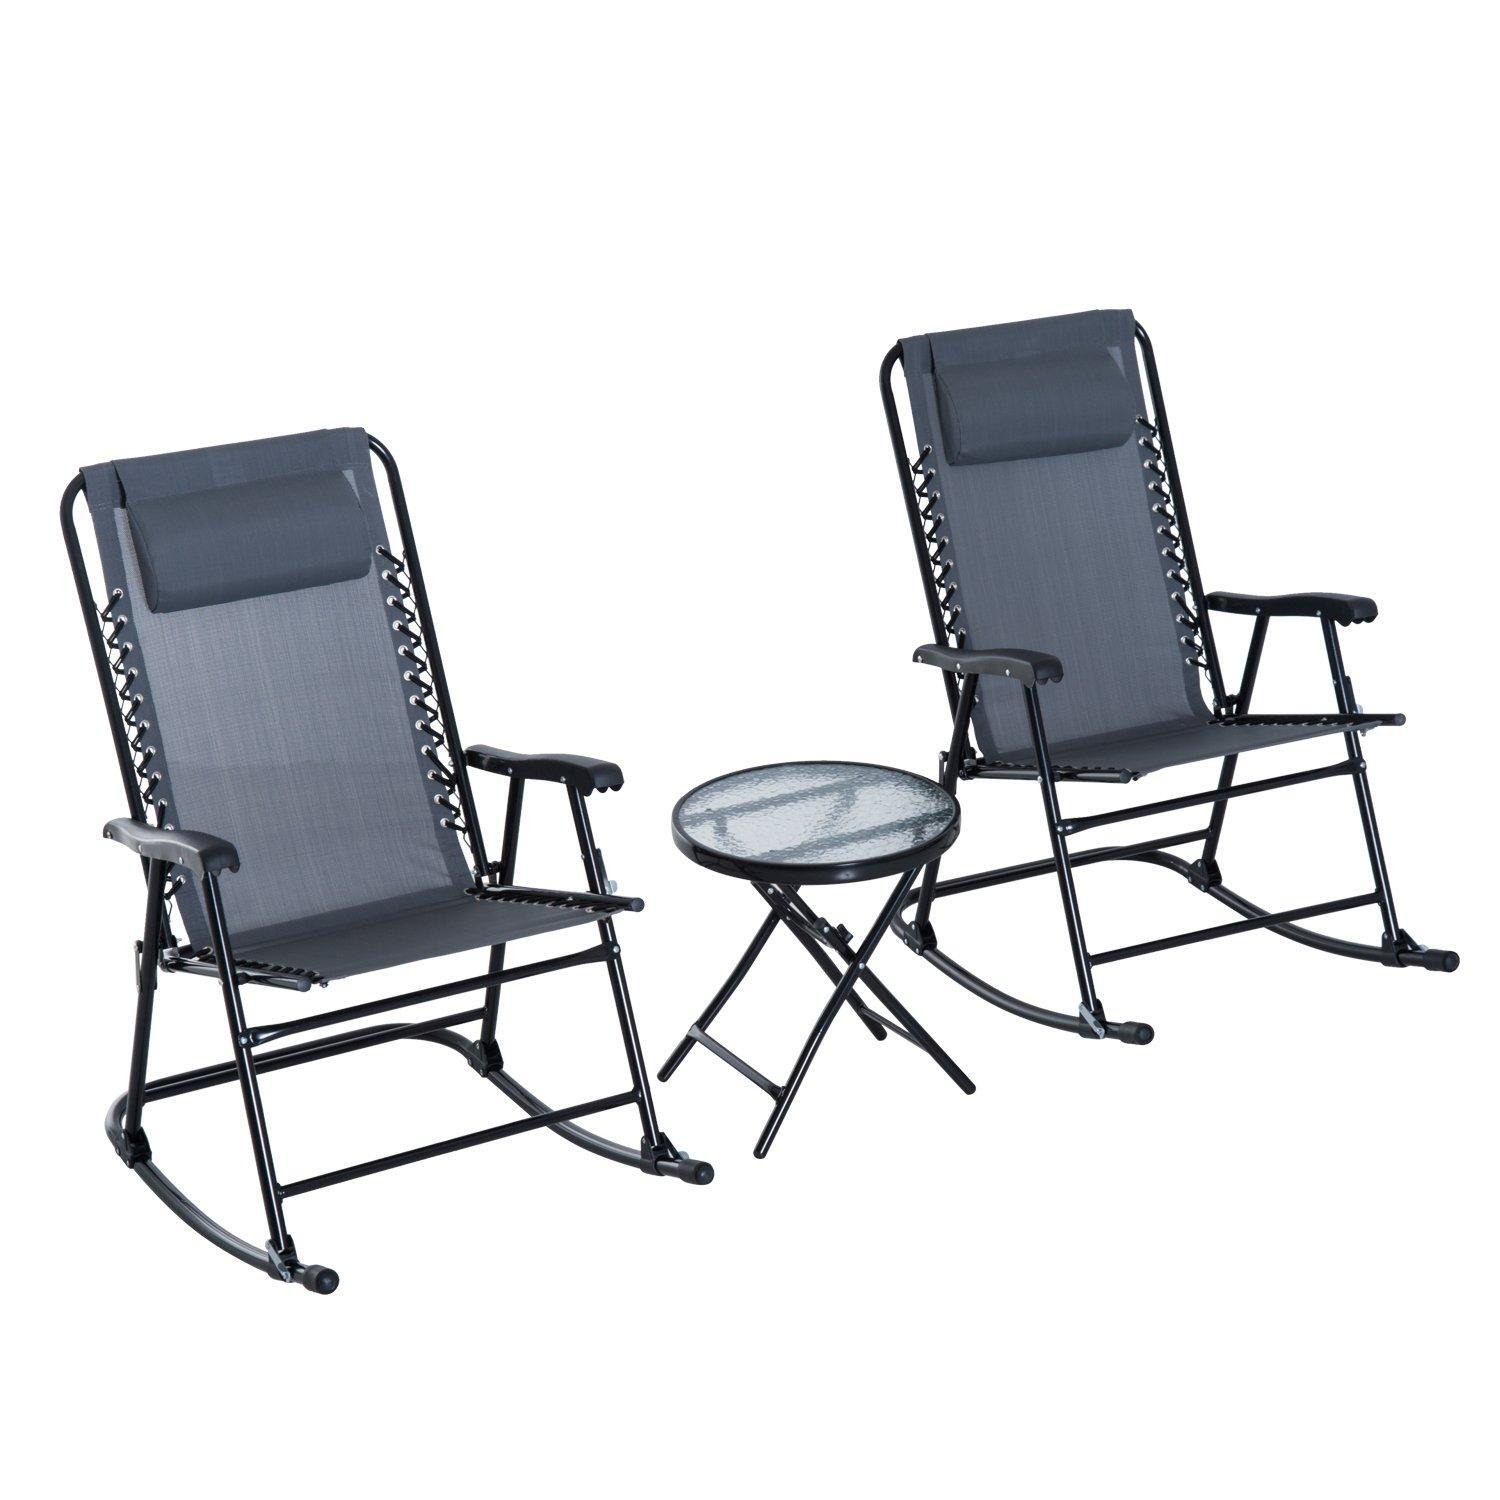 3 Pcs Outdoor Conversation Setwith Rocking Chairs and Side Table - image 1